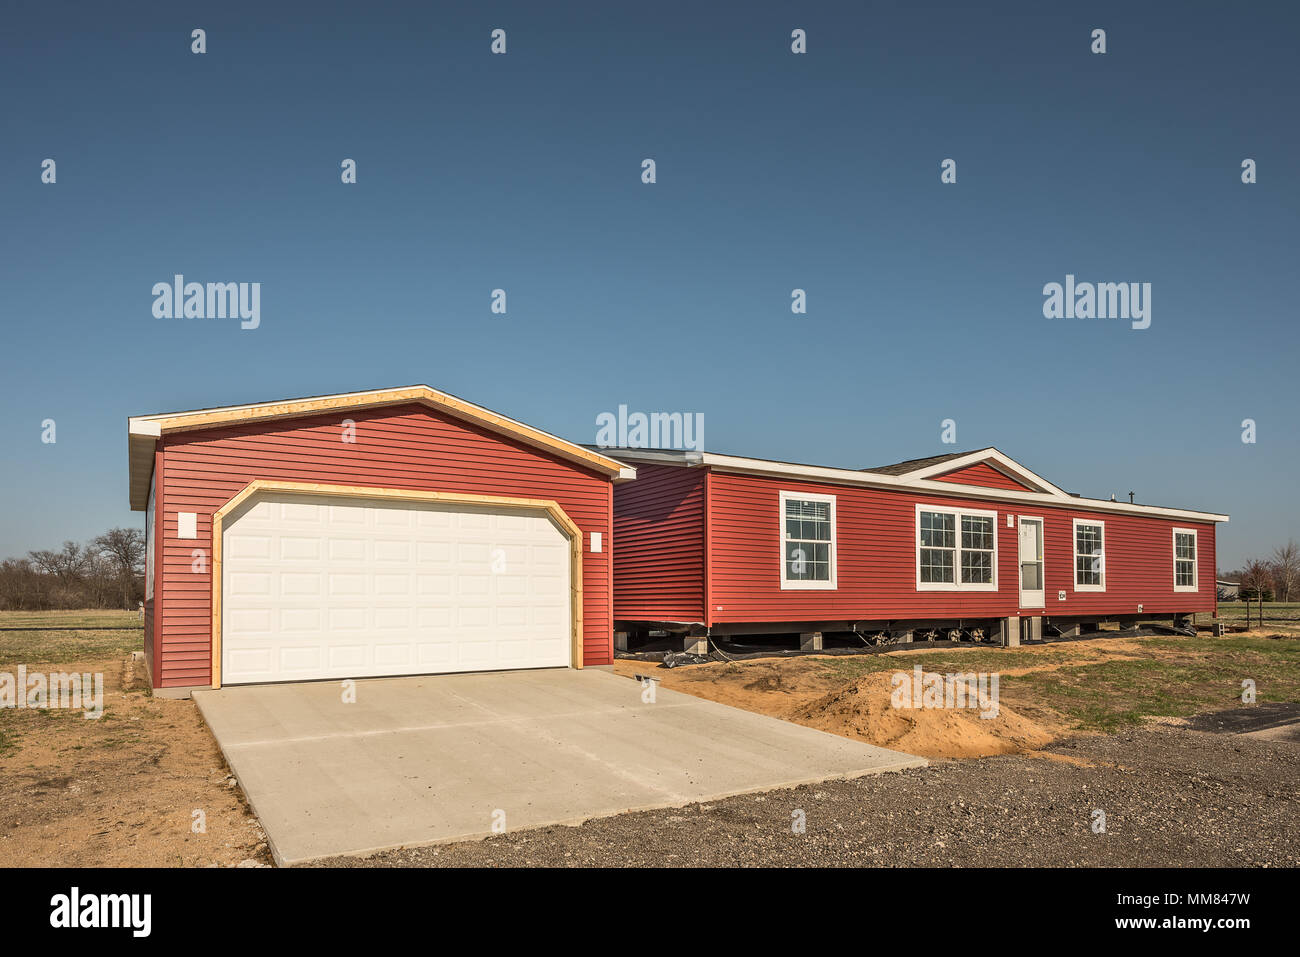 New manufactured home and stick built garage need finishing before owners can move in Stock Photo